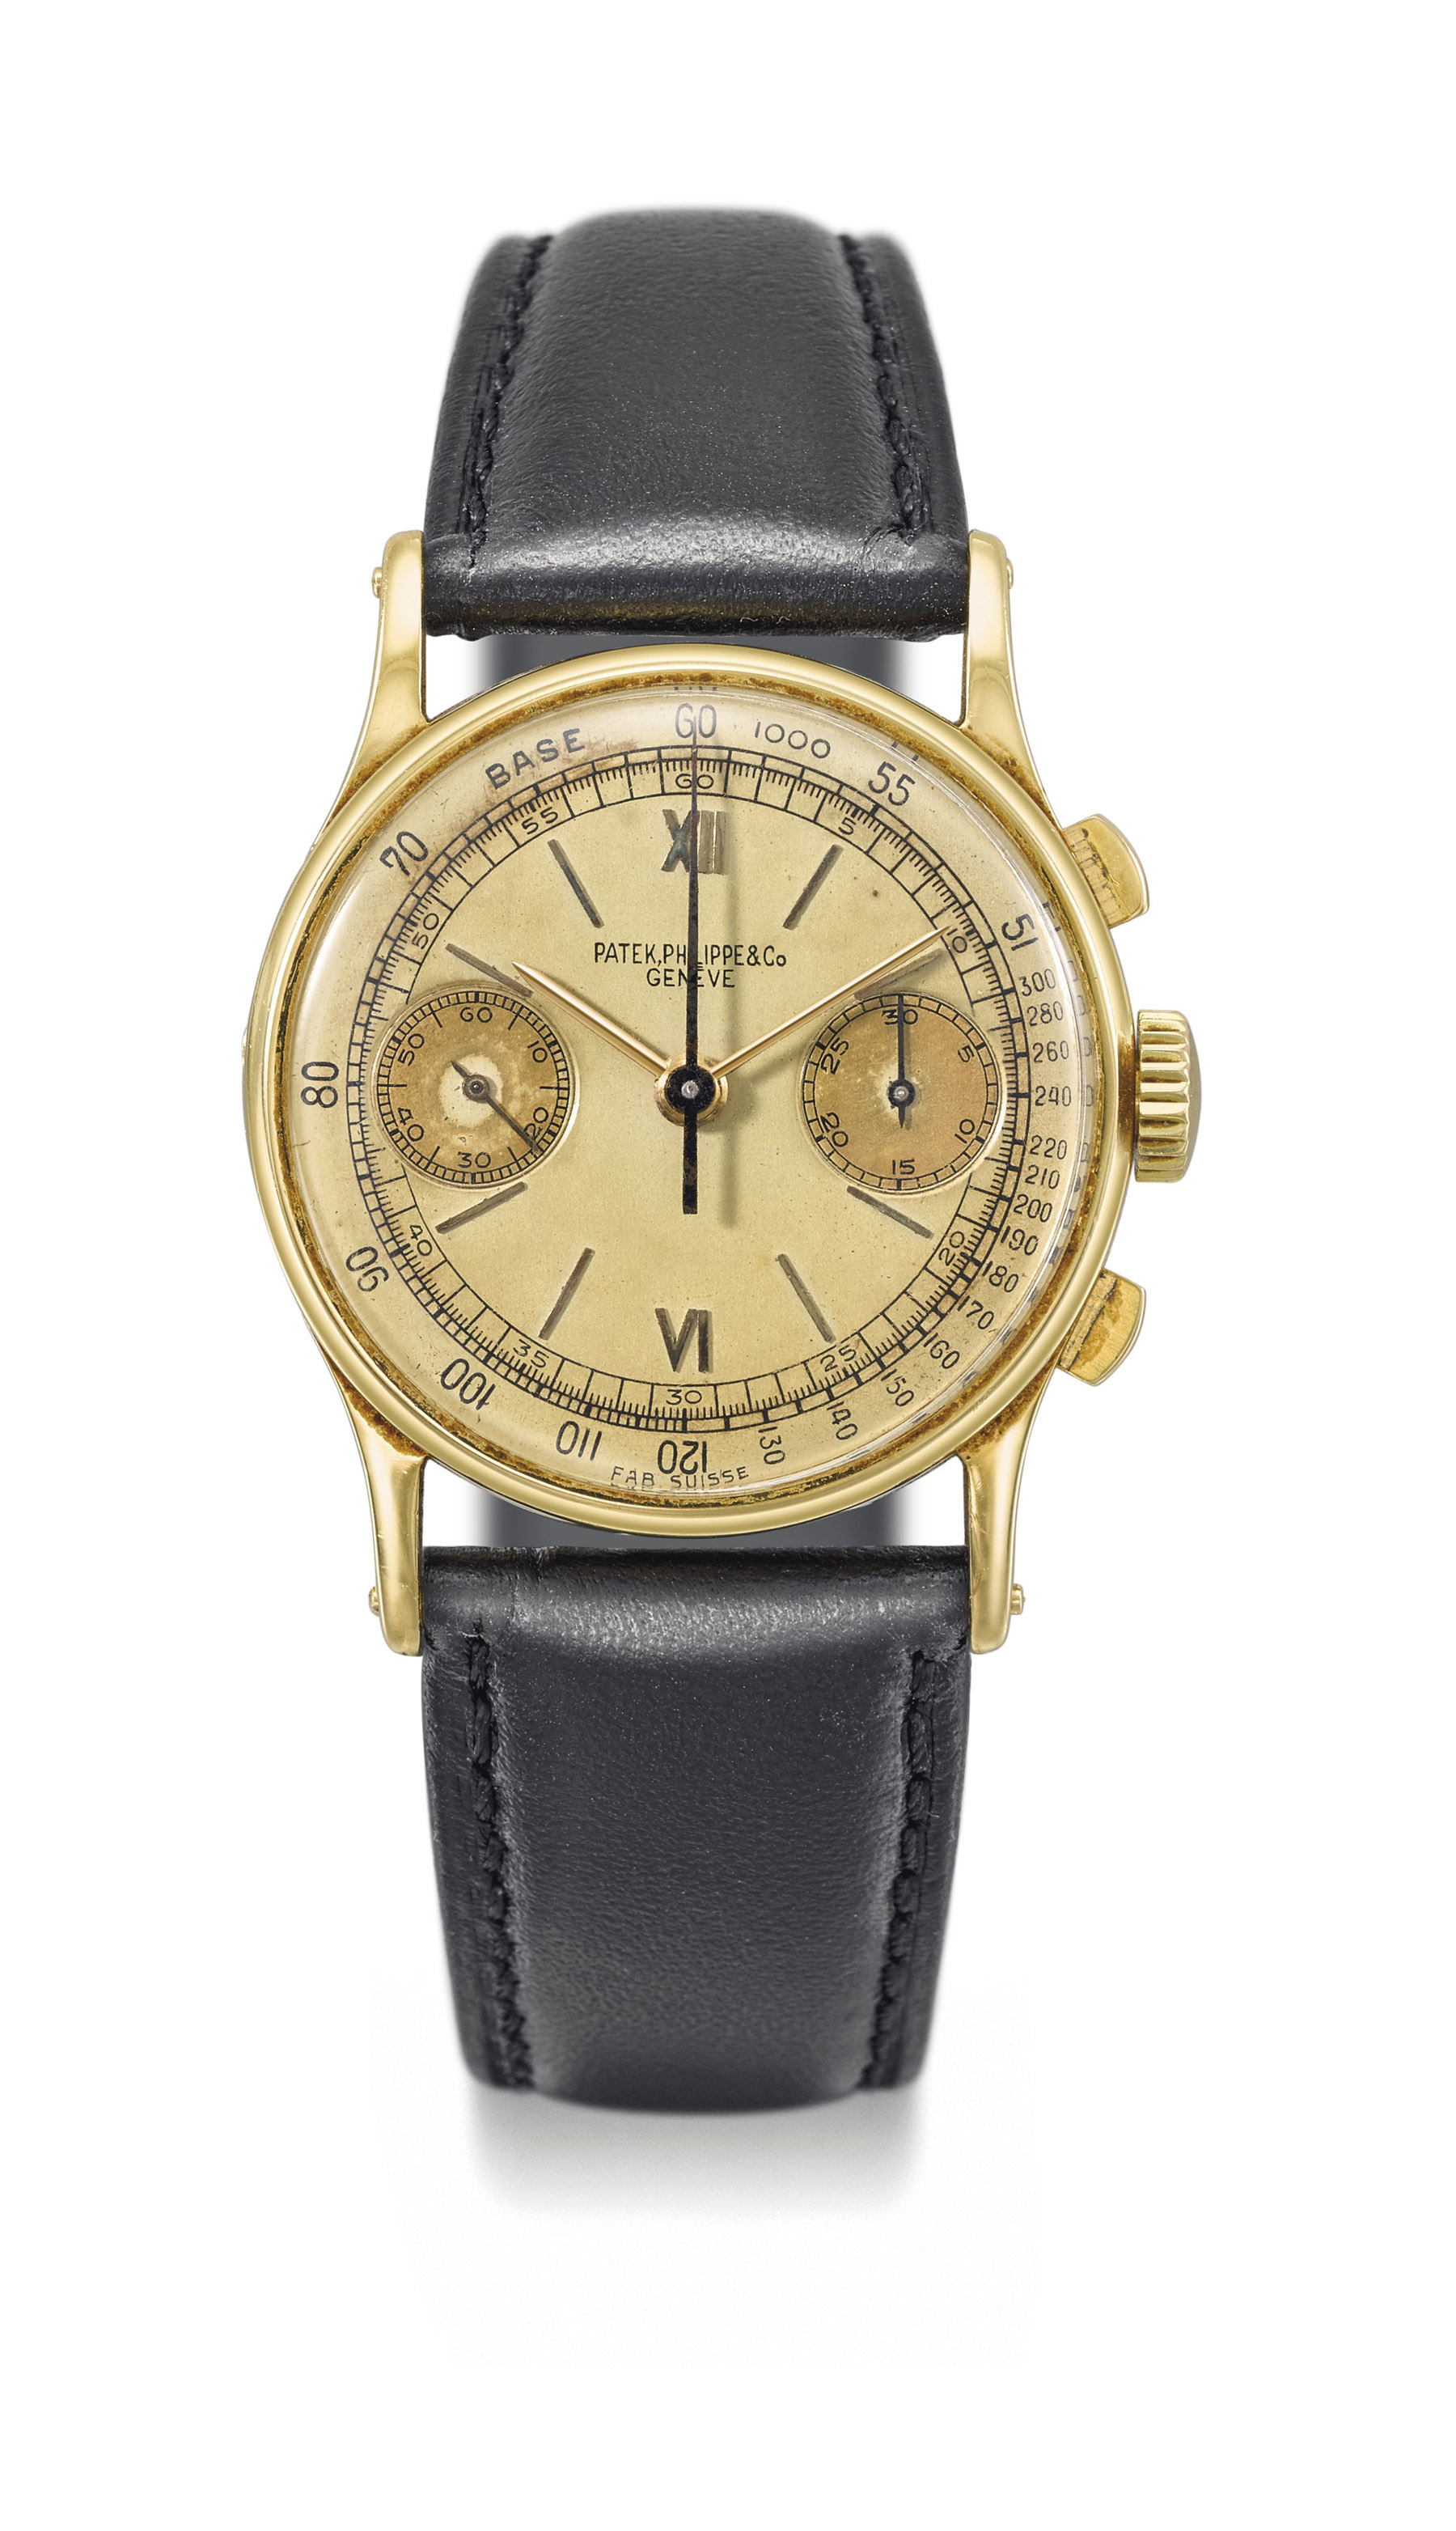 Patek Philippe. A very fine and rare 18K gold chronograph wristwatch Ref. 130, manufactured in 1942 Estimate CHF 20,000 – 30,000